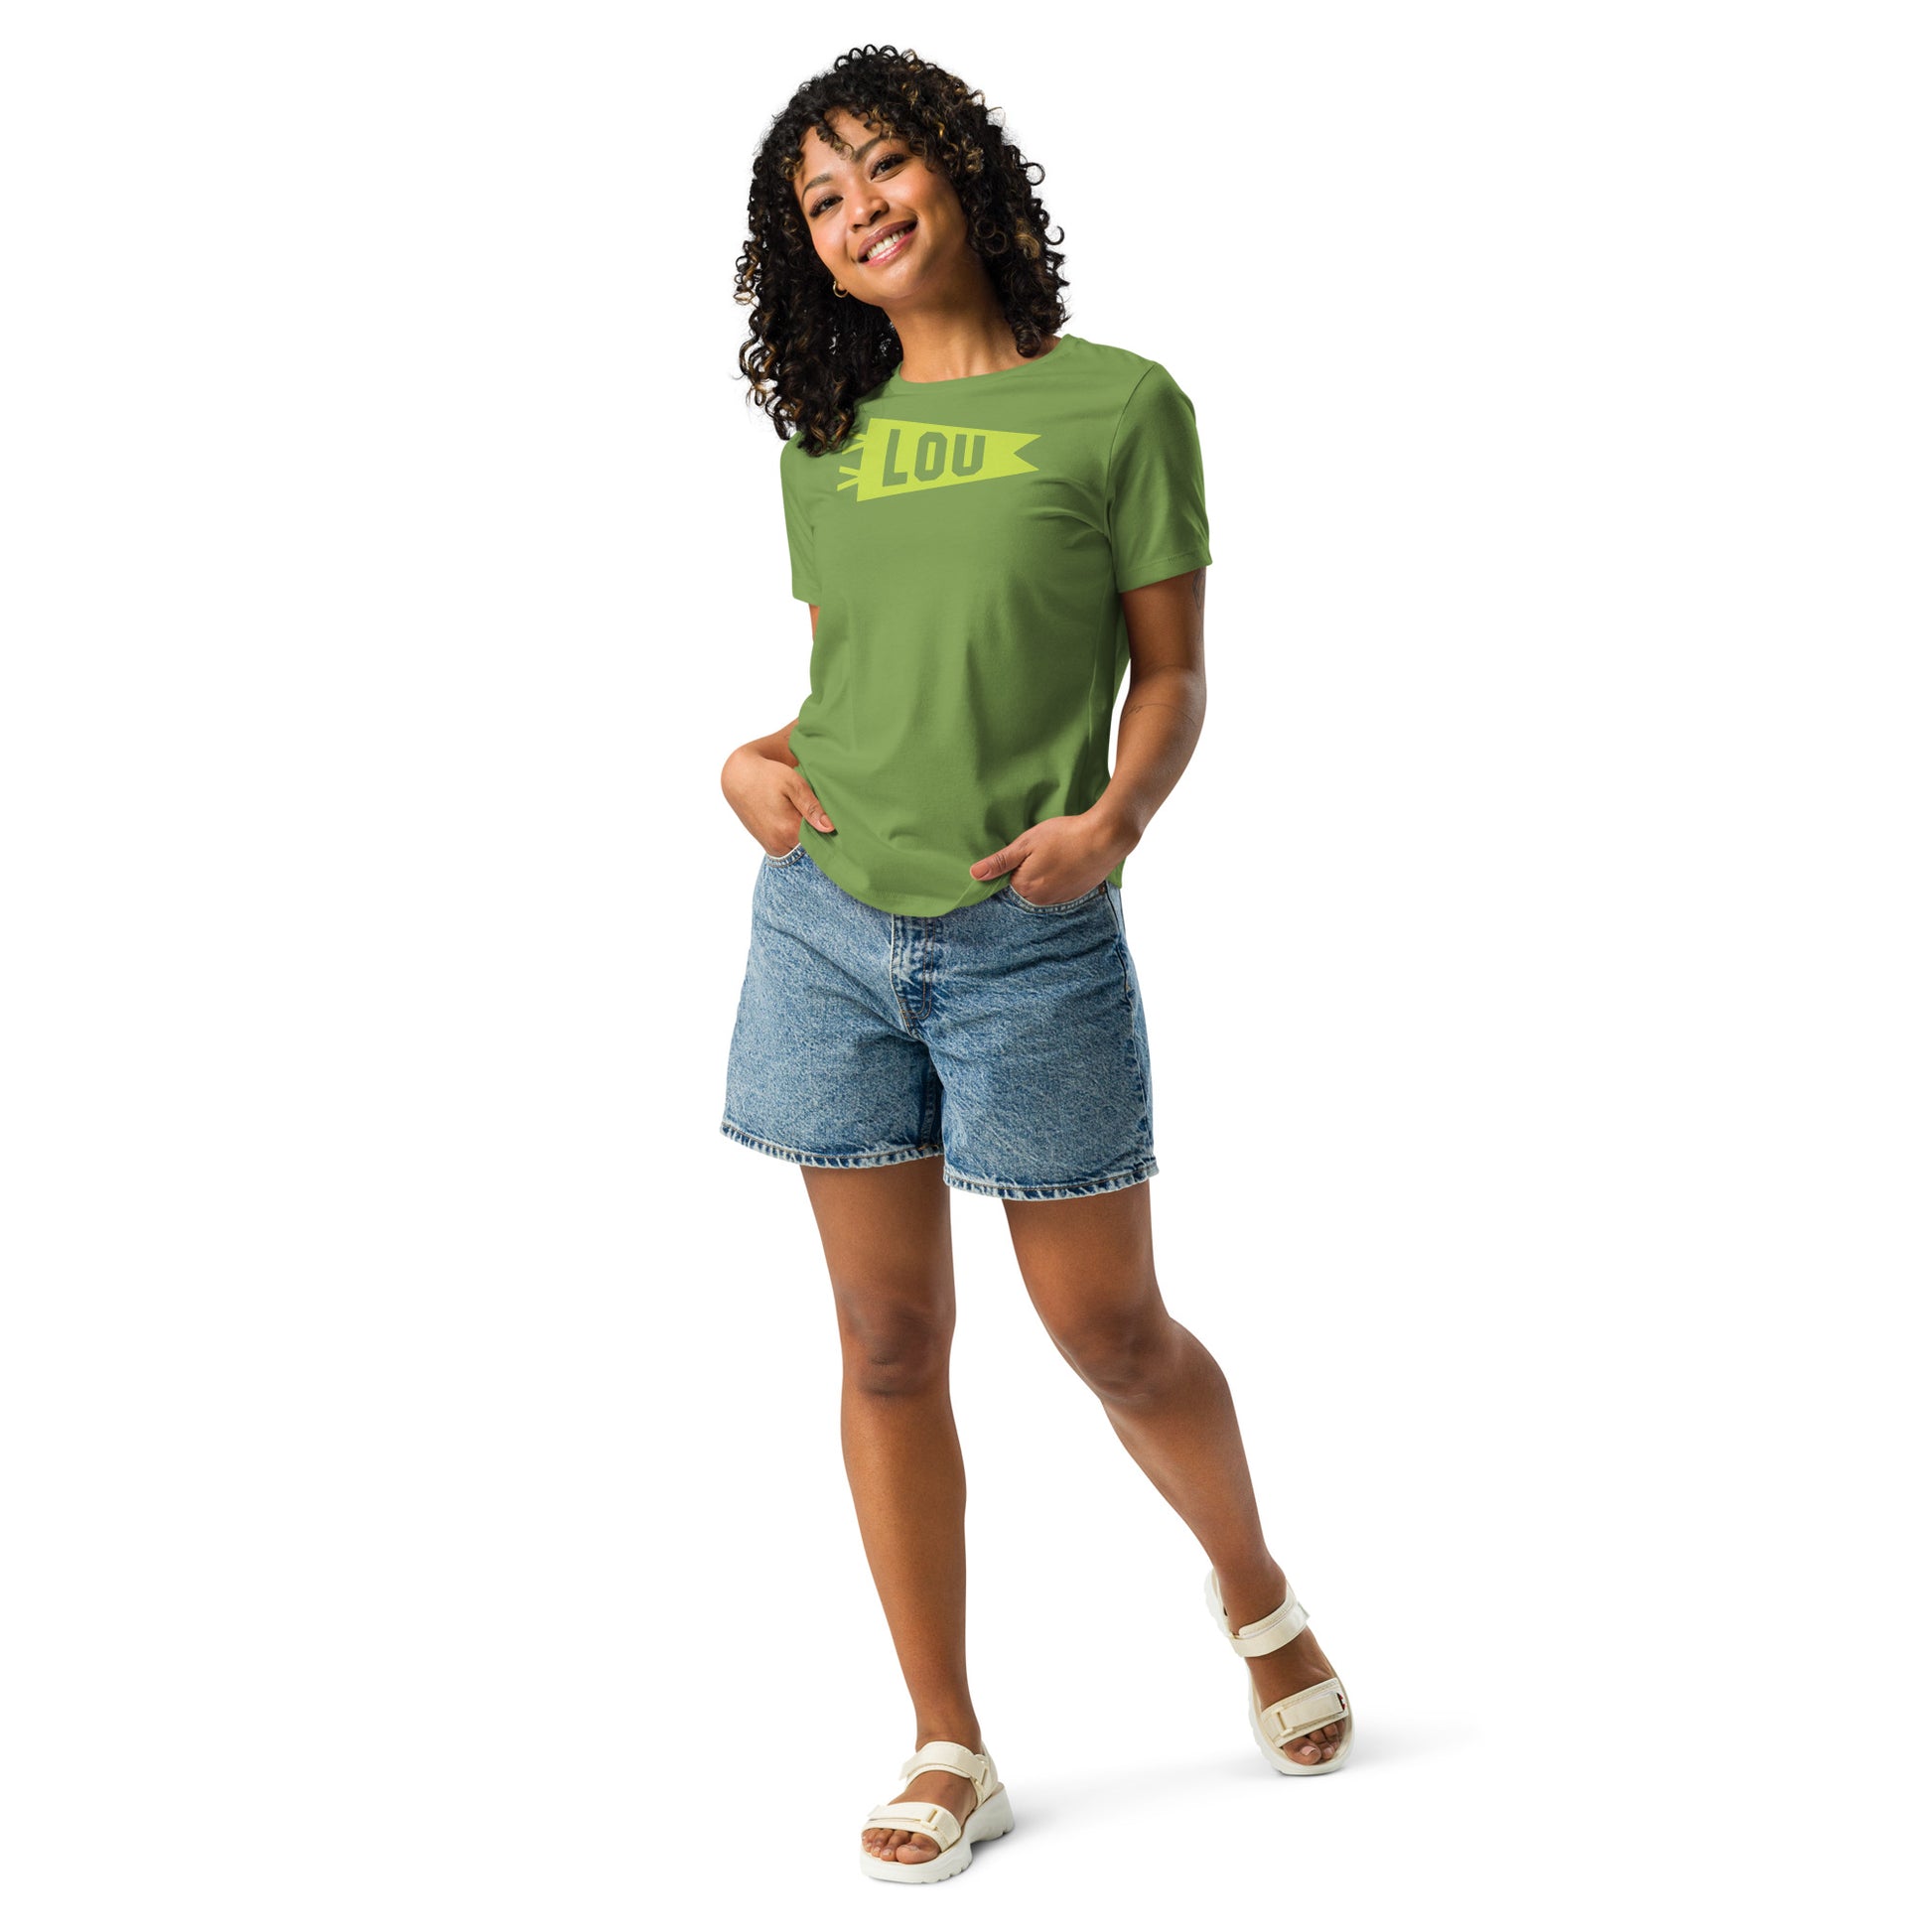 Airport Code Women's Tee - Green Graphic • LOU Louisville • YHM Designs - Image 05